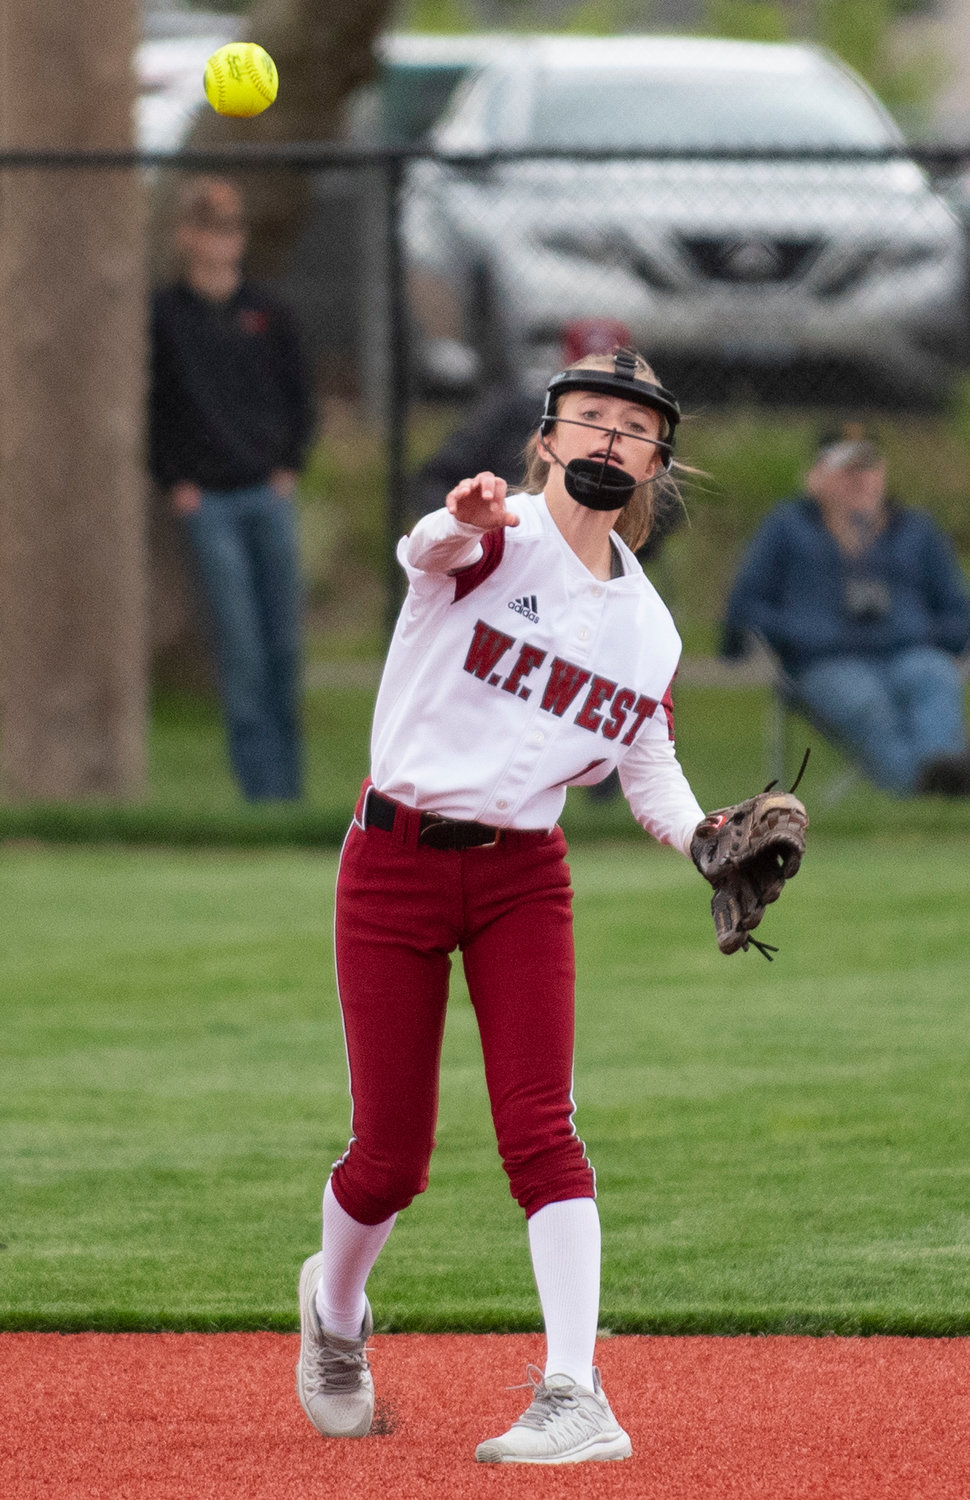 W.F. West sophomore Brielle Etter makes a throw from second base on Thursday.